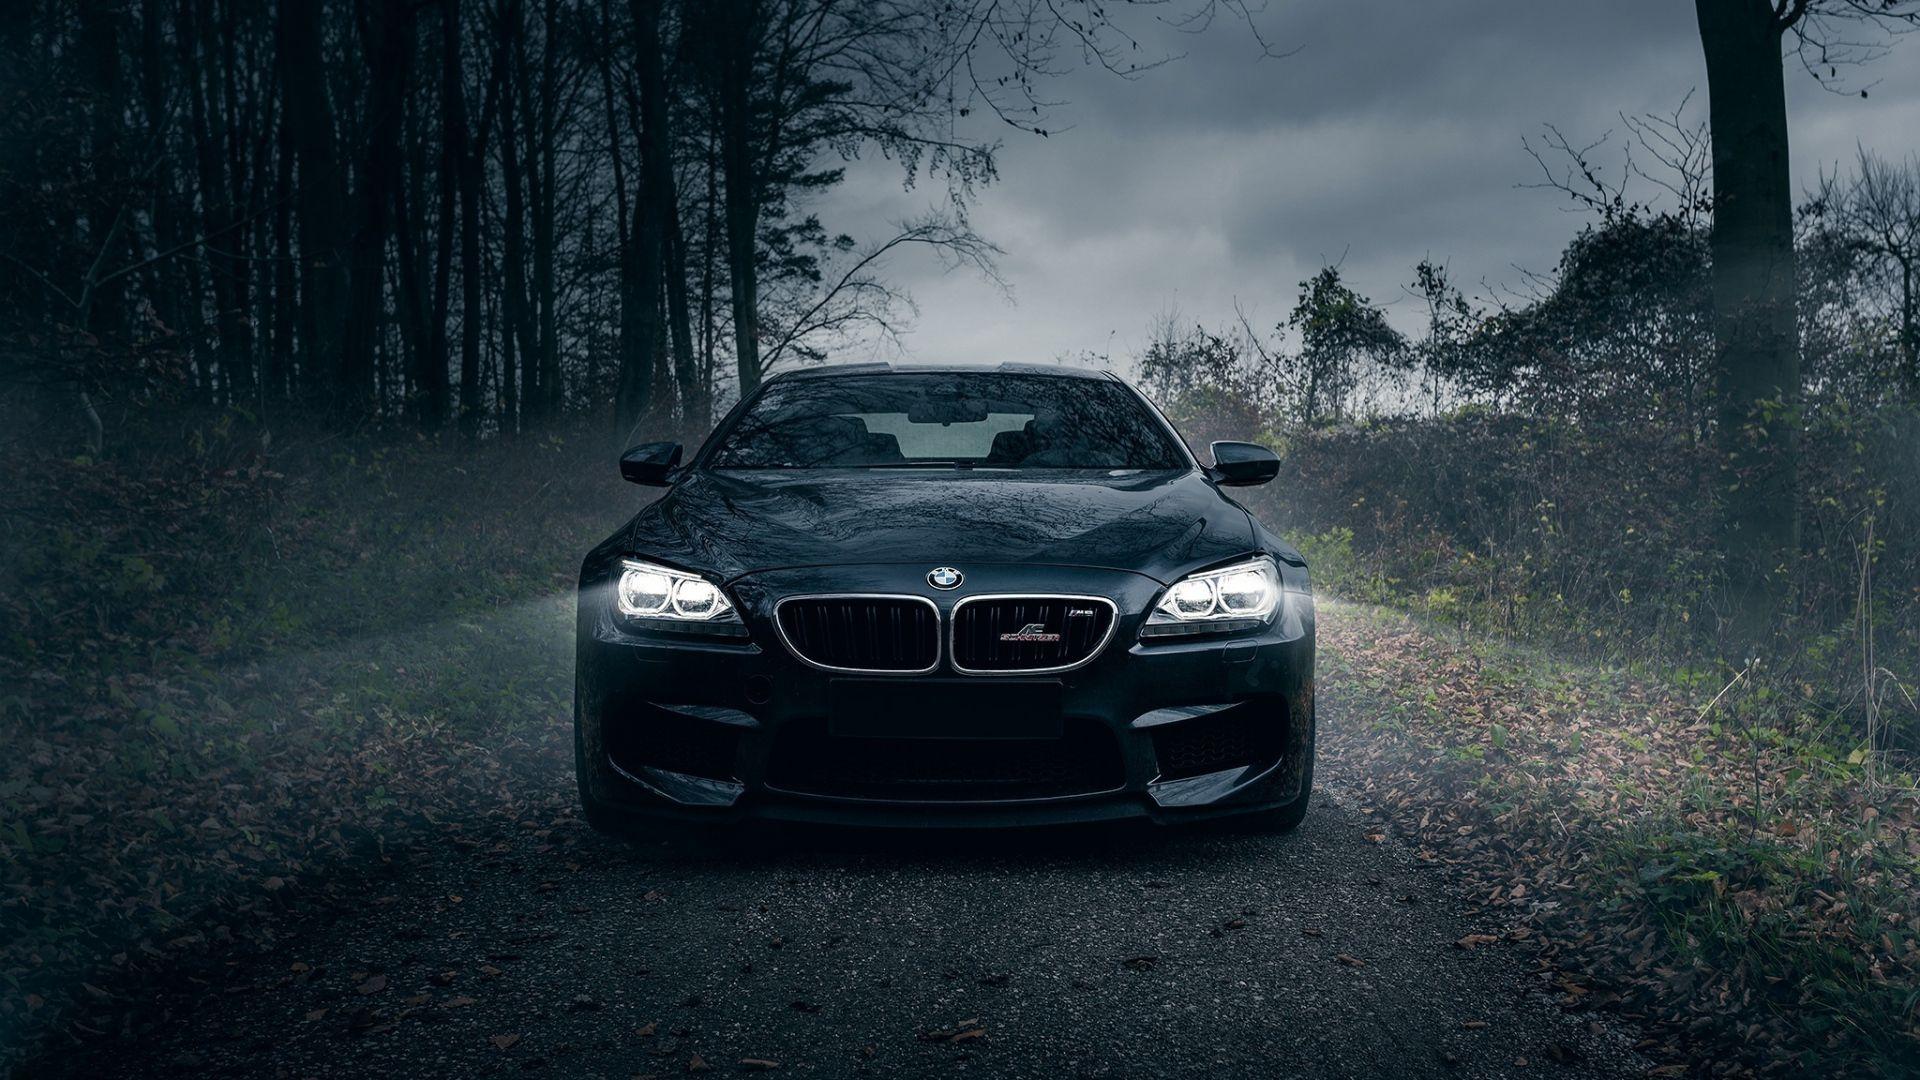 BMW M6 Wallpapers - Wallpaper Cave